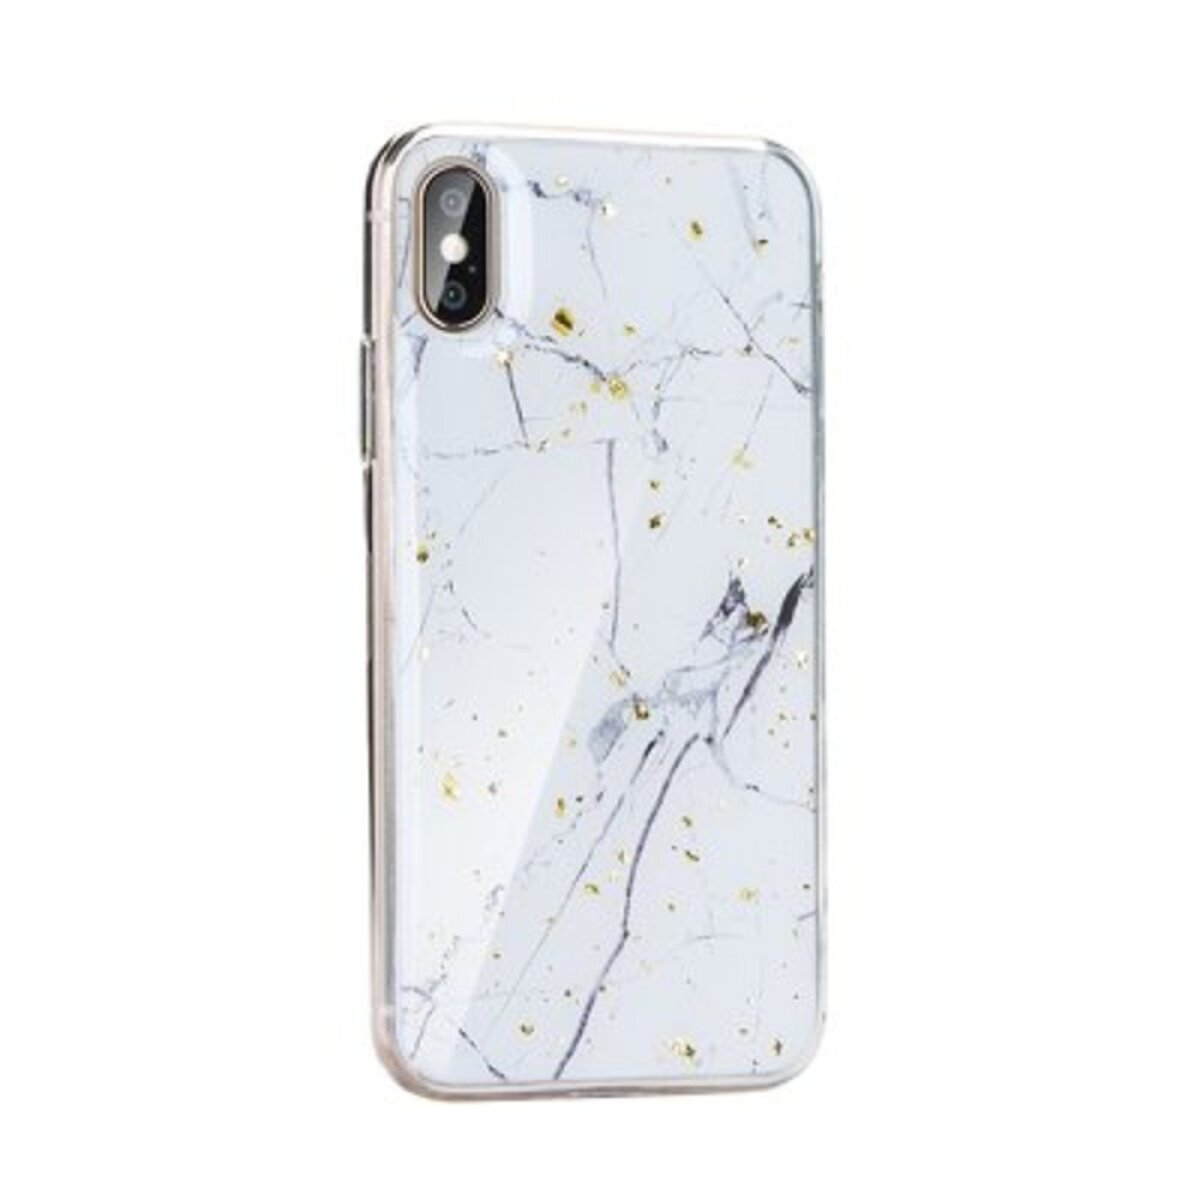 available Case Y7 Huawei, Bookcover, MARBLE design 2019, 1, 2019 Not Y7 FORCELL